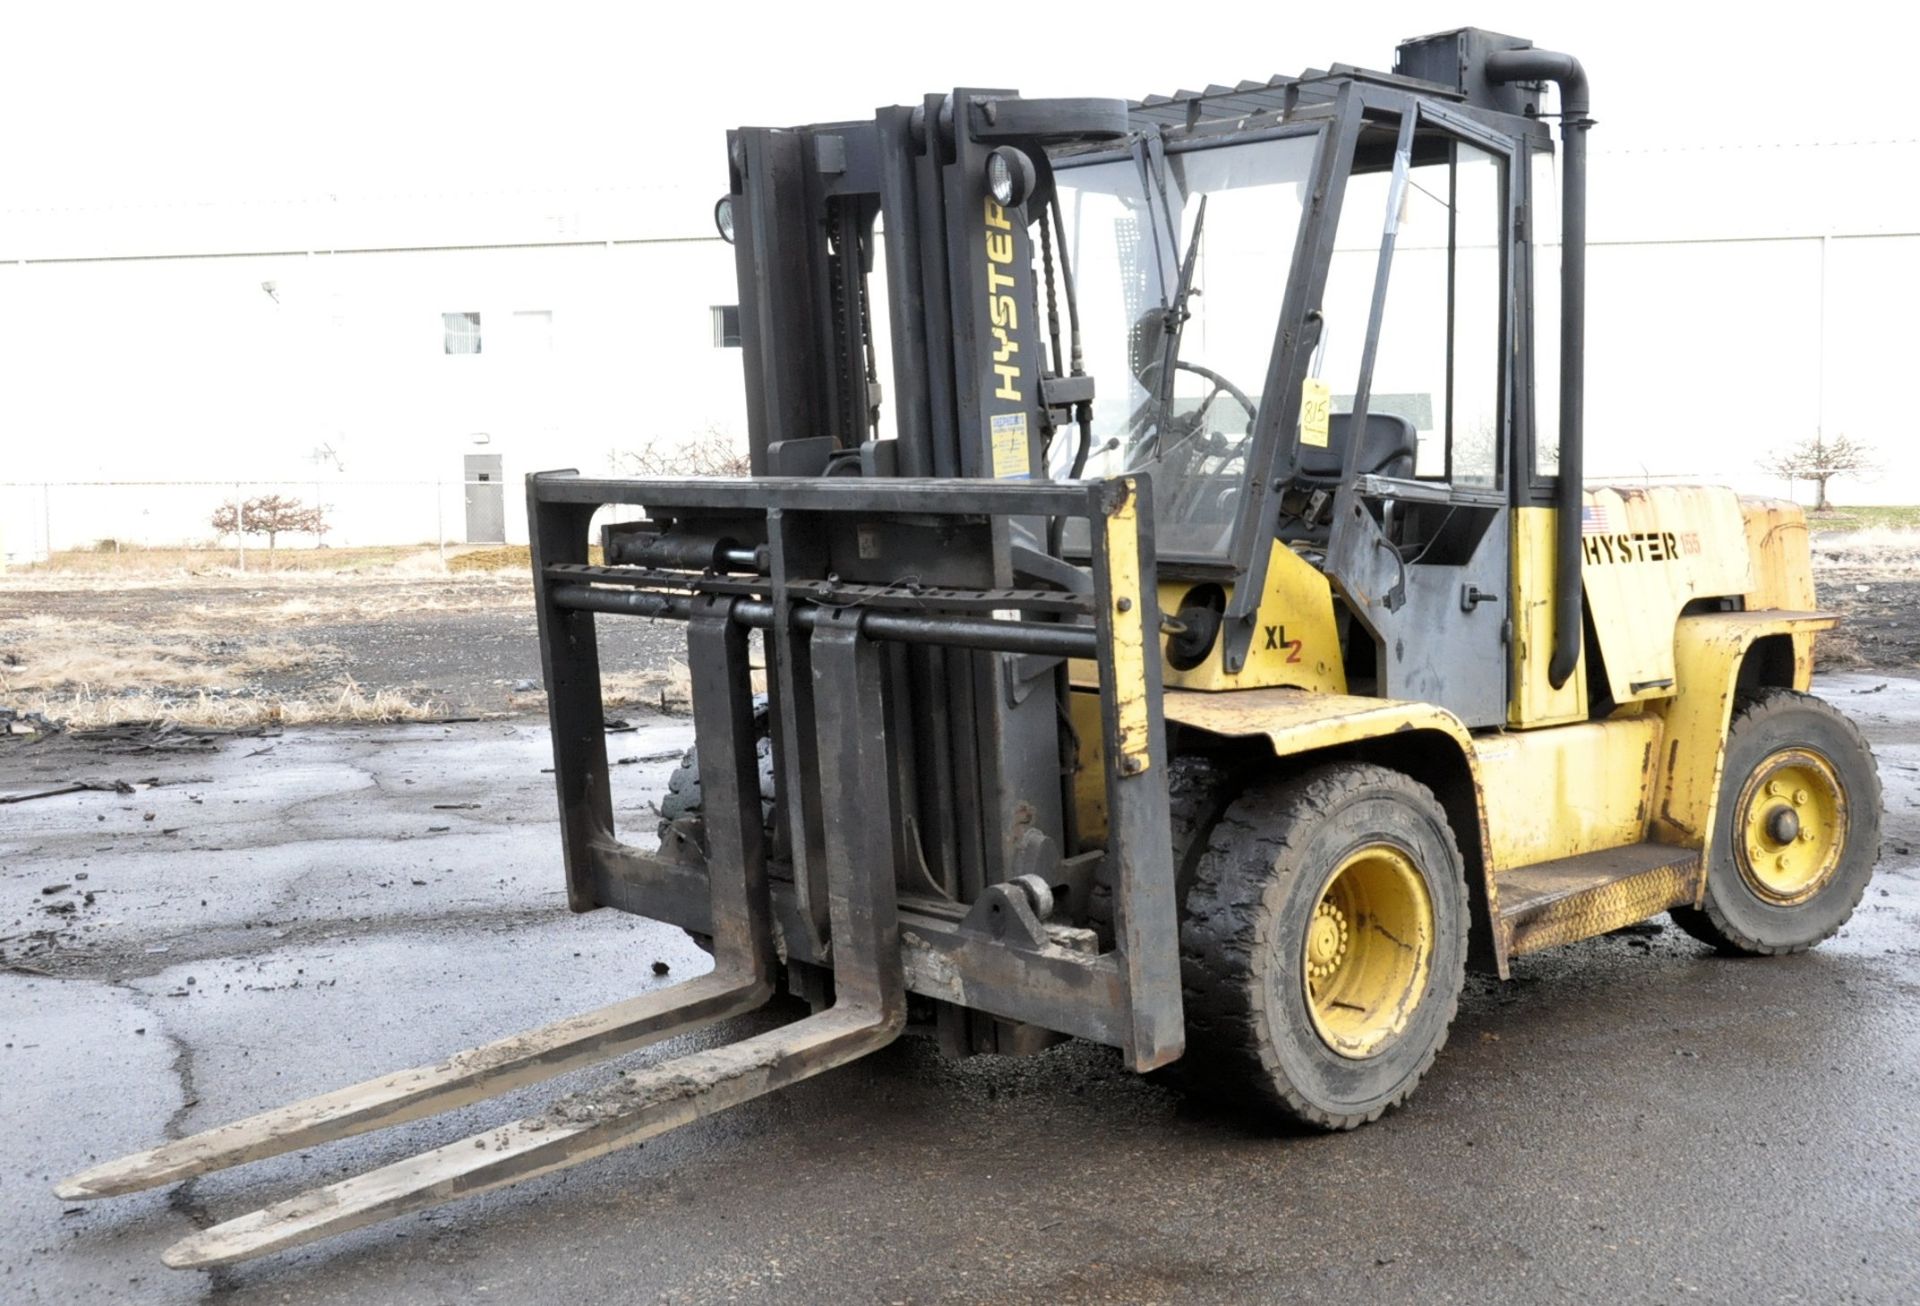 Hyster Model H155XL, Approx. 15,000 Lb. Capacity, 240" Lift Capacity, Diesel Fuel Fork Lift Truck,